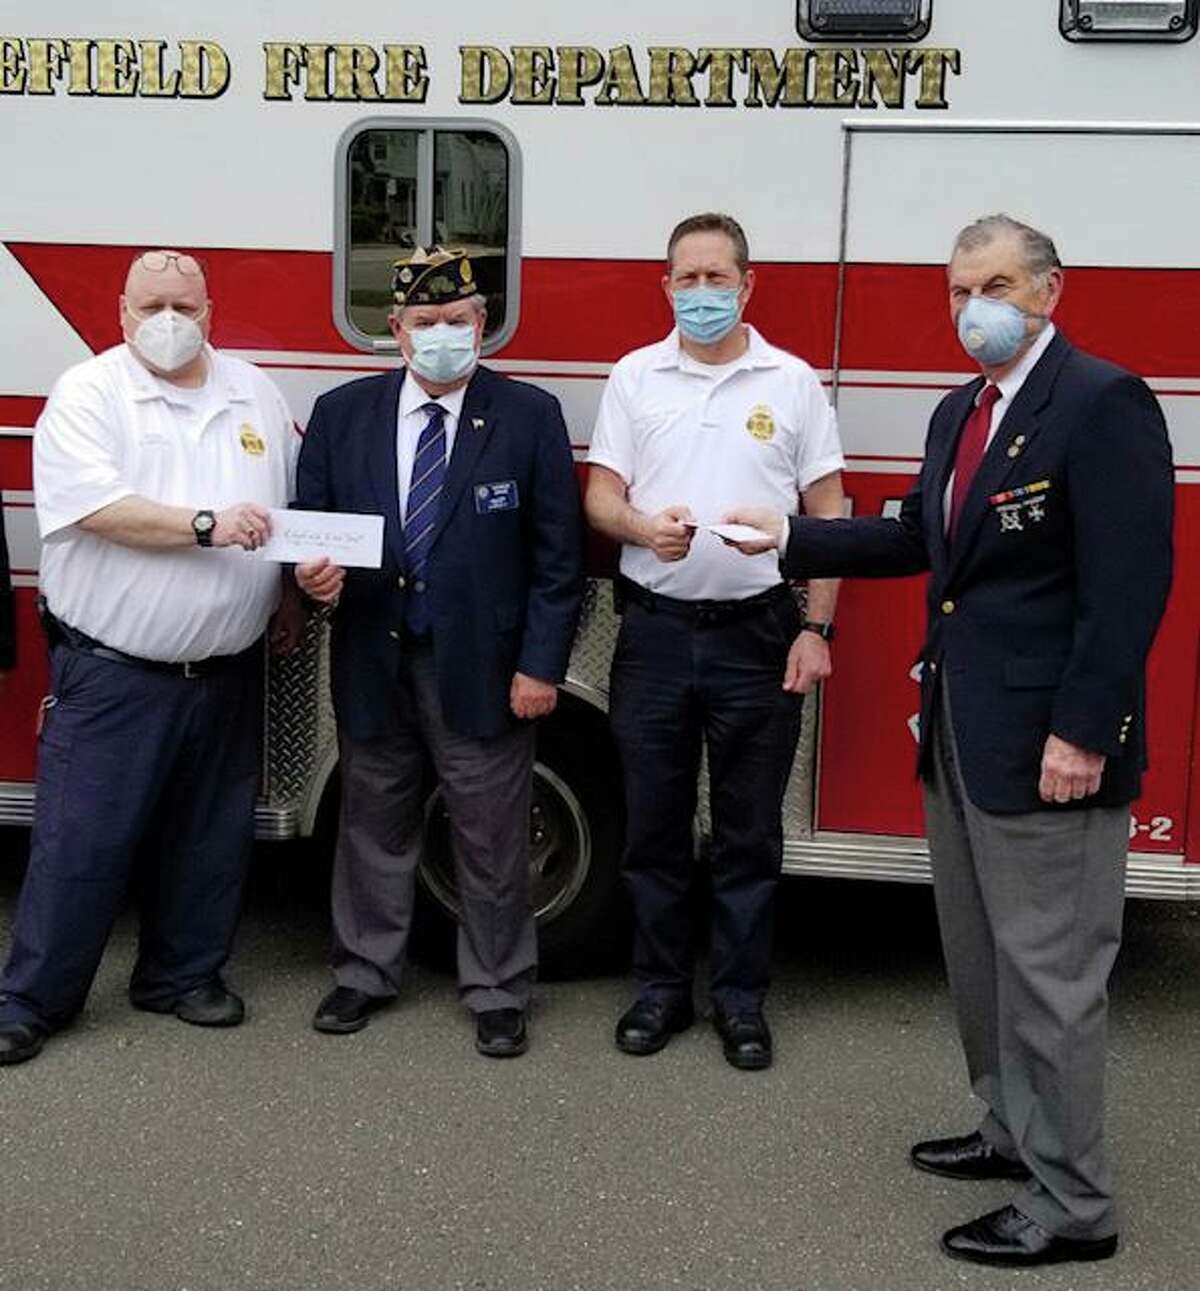 The Marine Veterans of Fairfield County and The Ridgefield American Legion each gave a check for $1,000 to the Ridgefield Fire Departments. Pictured are Fire Chief Jerry Myers; Ridgefield American Legion Commander George Besse; Assistant Fire Chief Michael Grasso; and Dick Tiani of the Marine Veterans of Fairfield County.